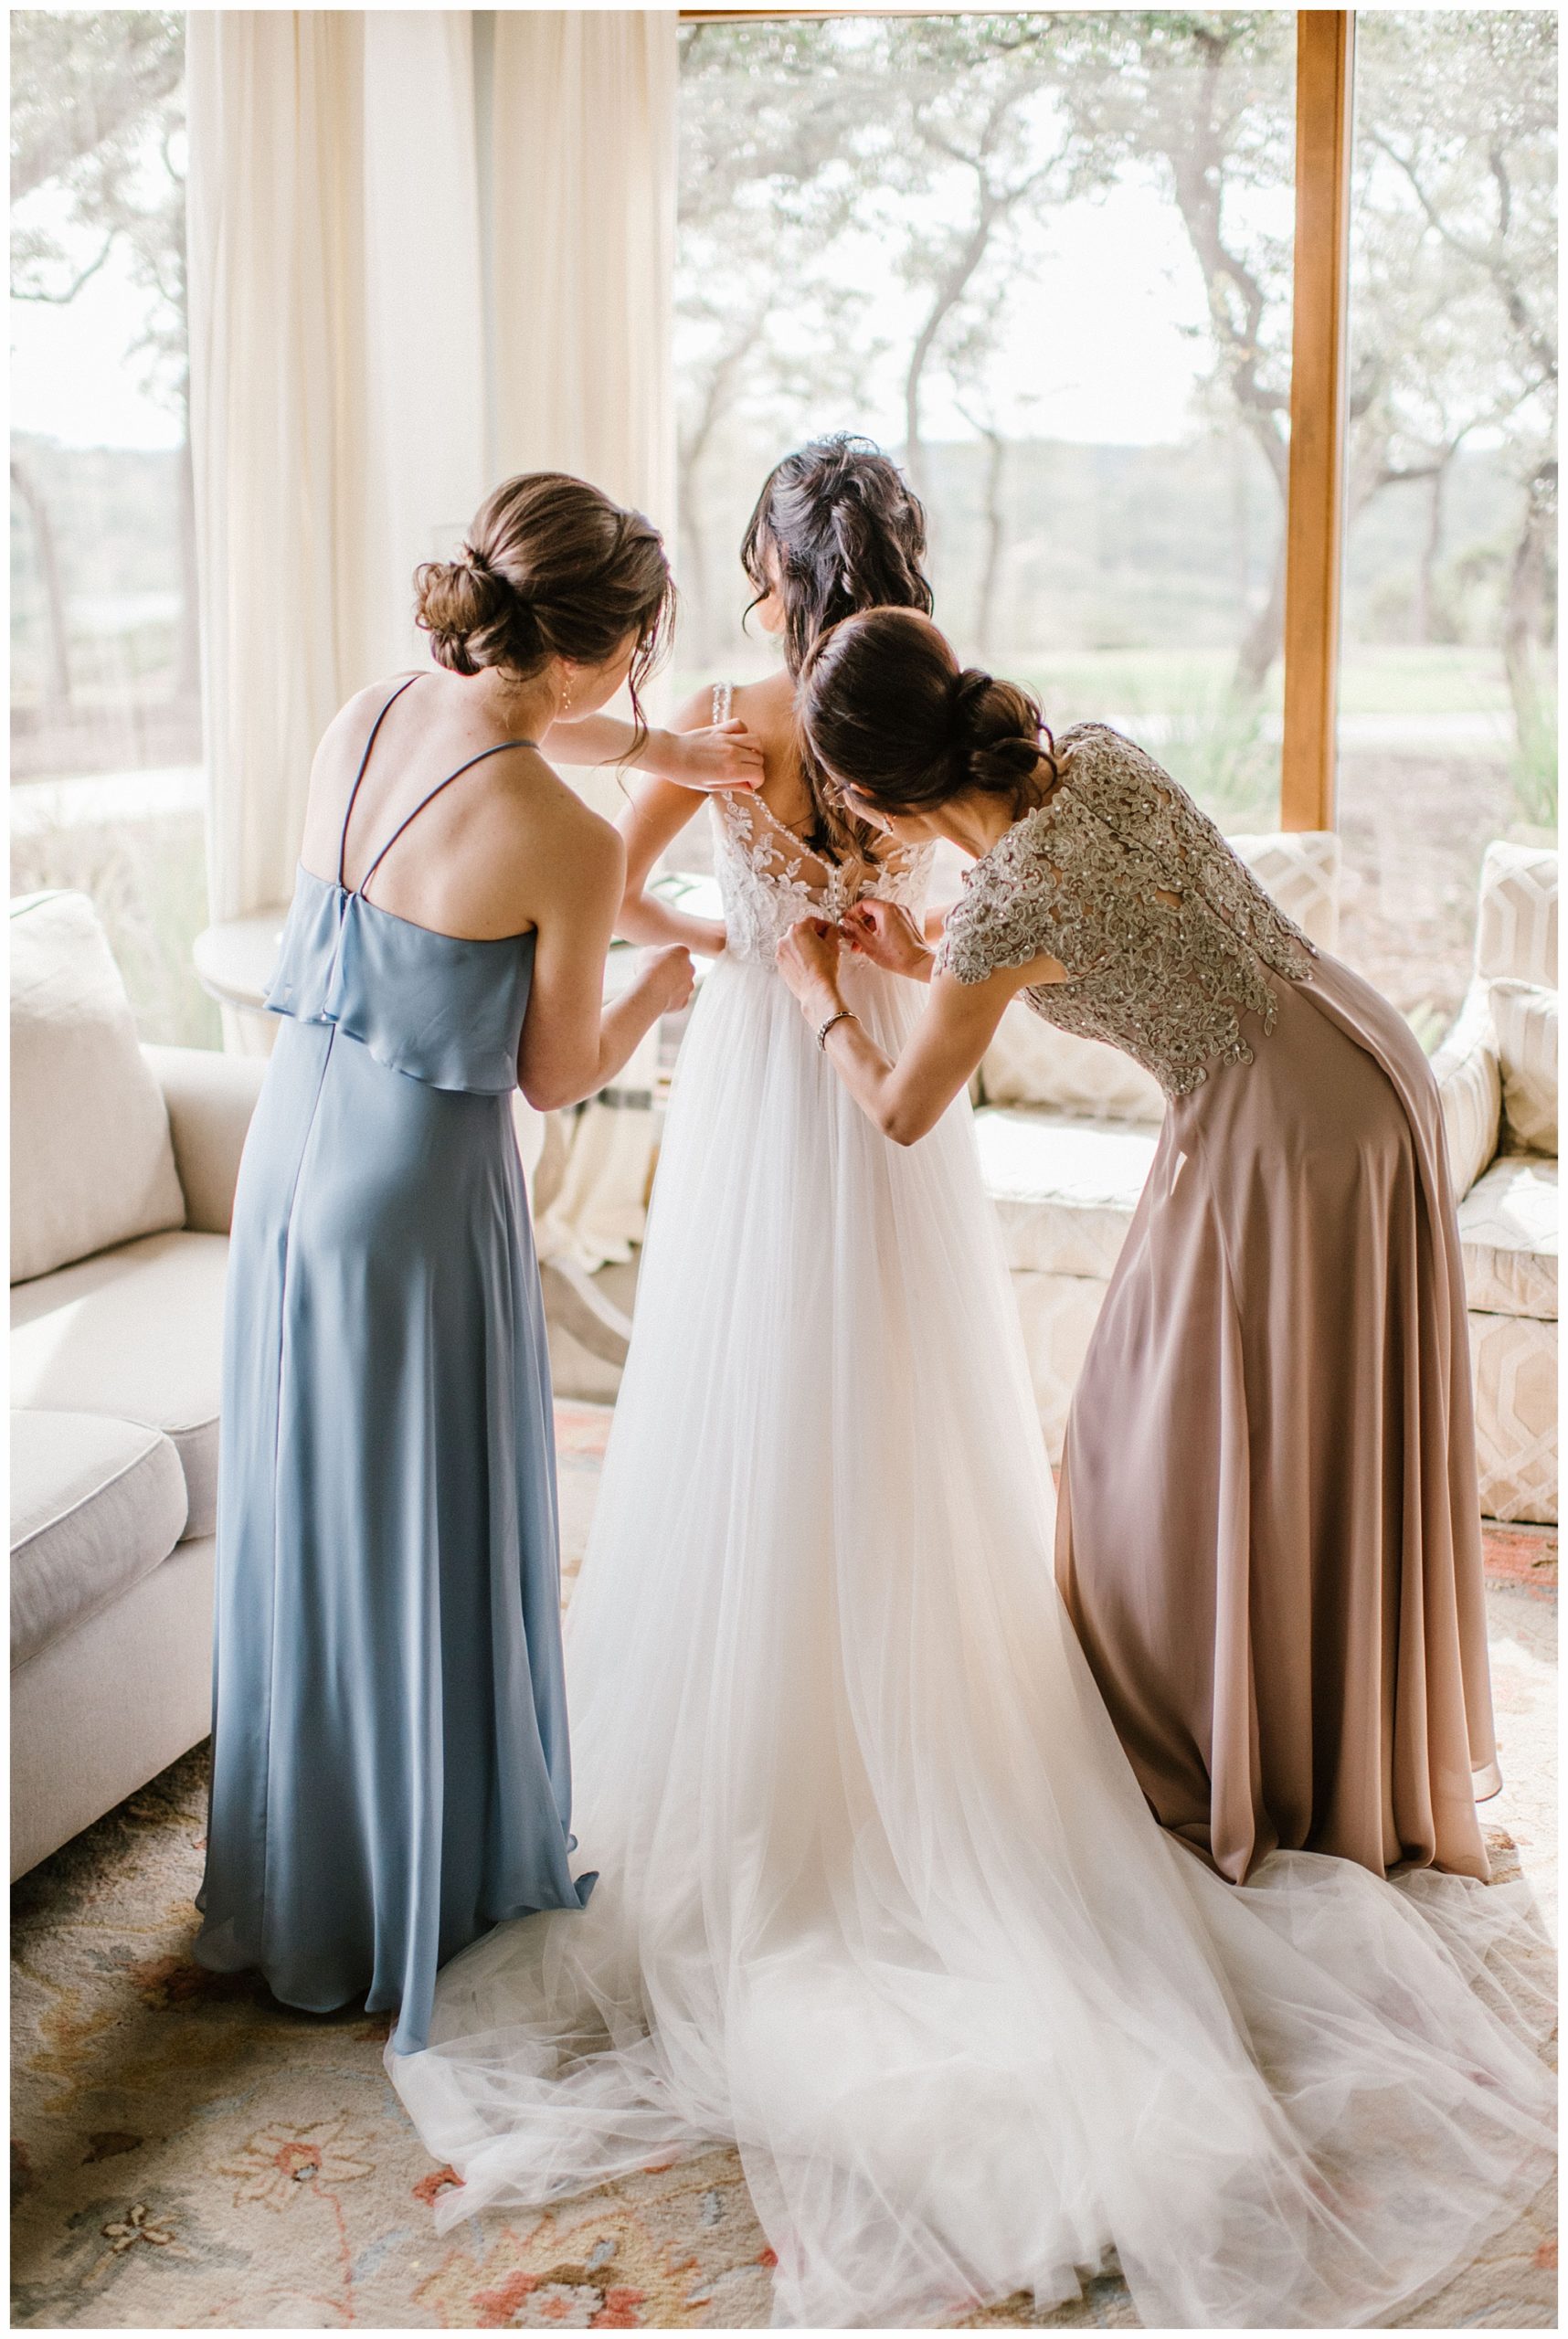 Bride Getting Ready with the help of her Mom and Maid of Honor